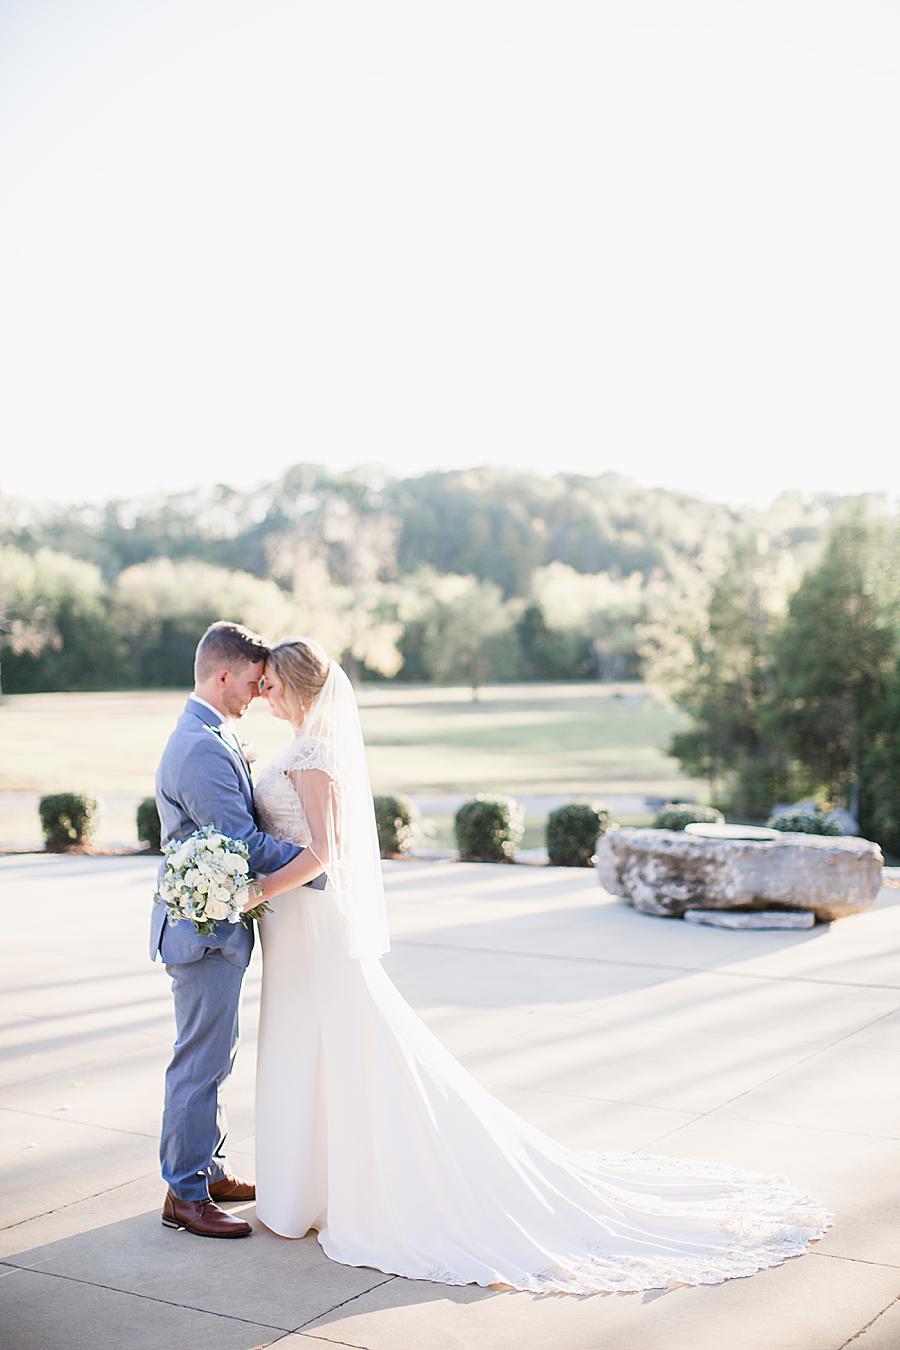 Foreheads together at this Graystone Quarry wedding by Knoxville Wedding Photographer, Amanda May Photos.